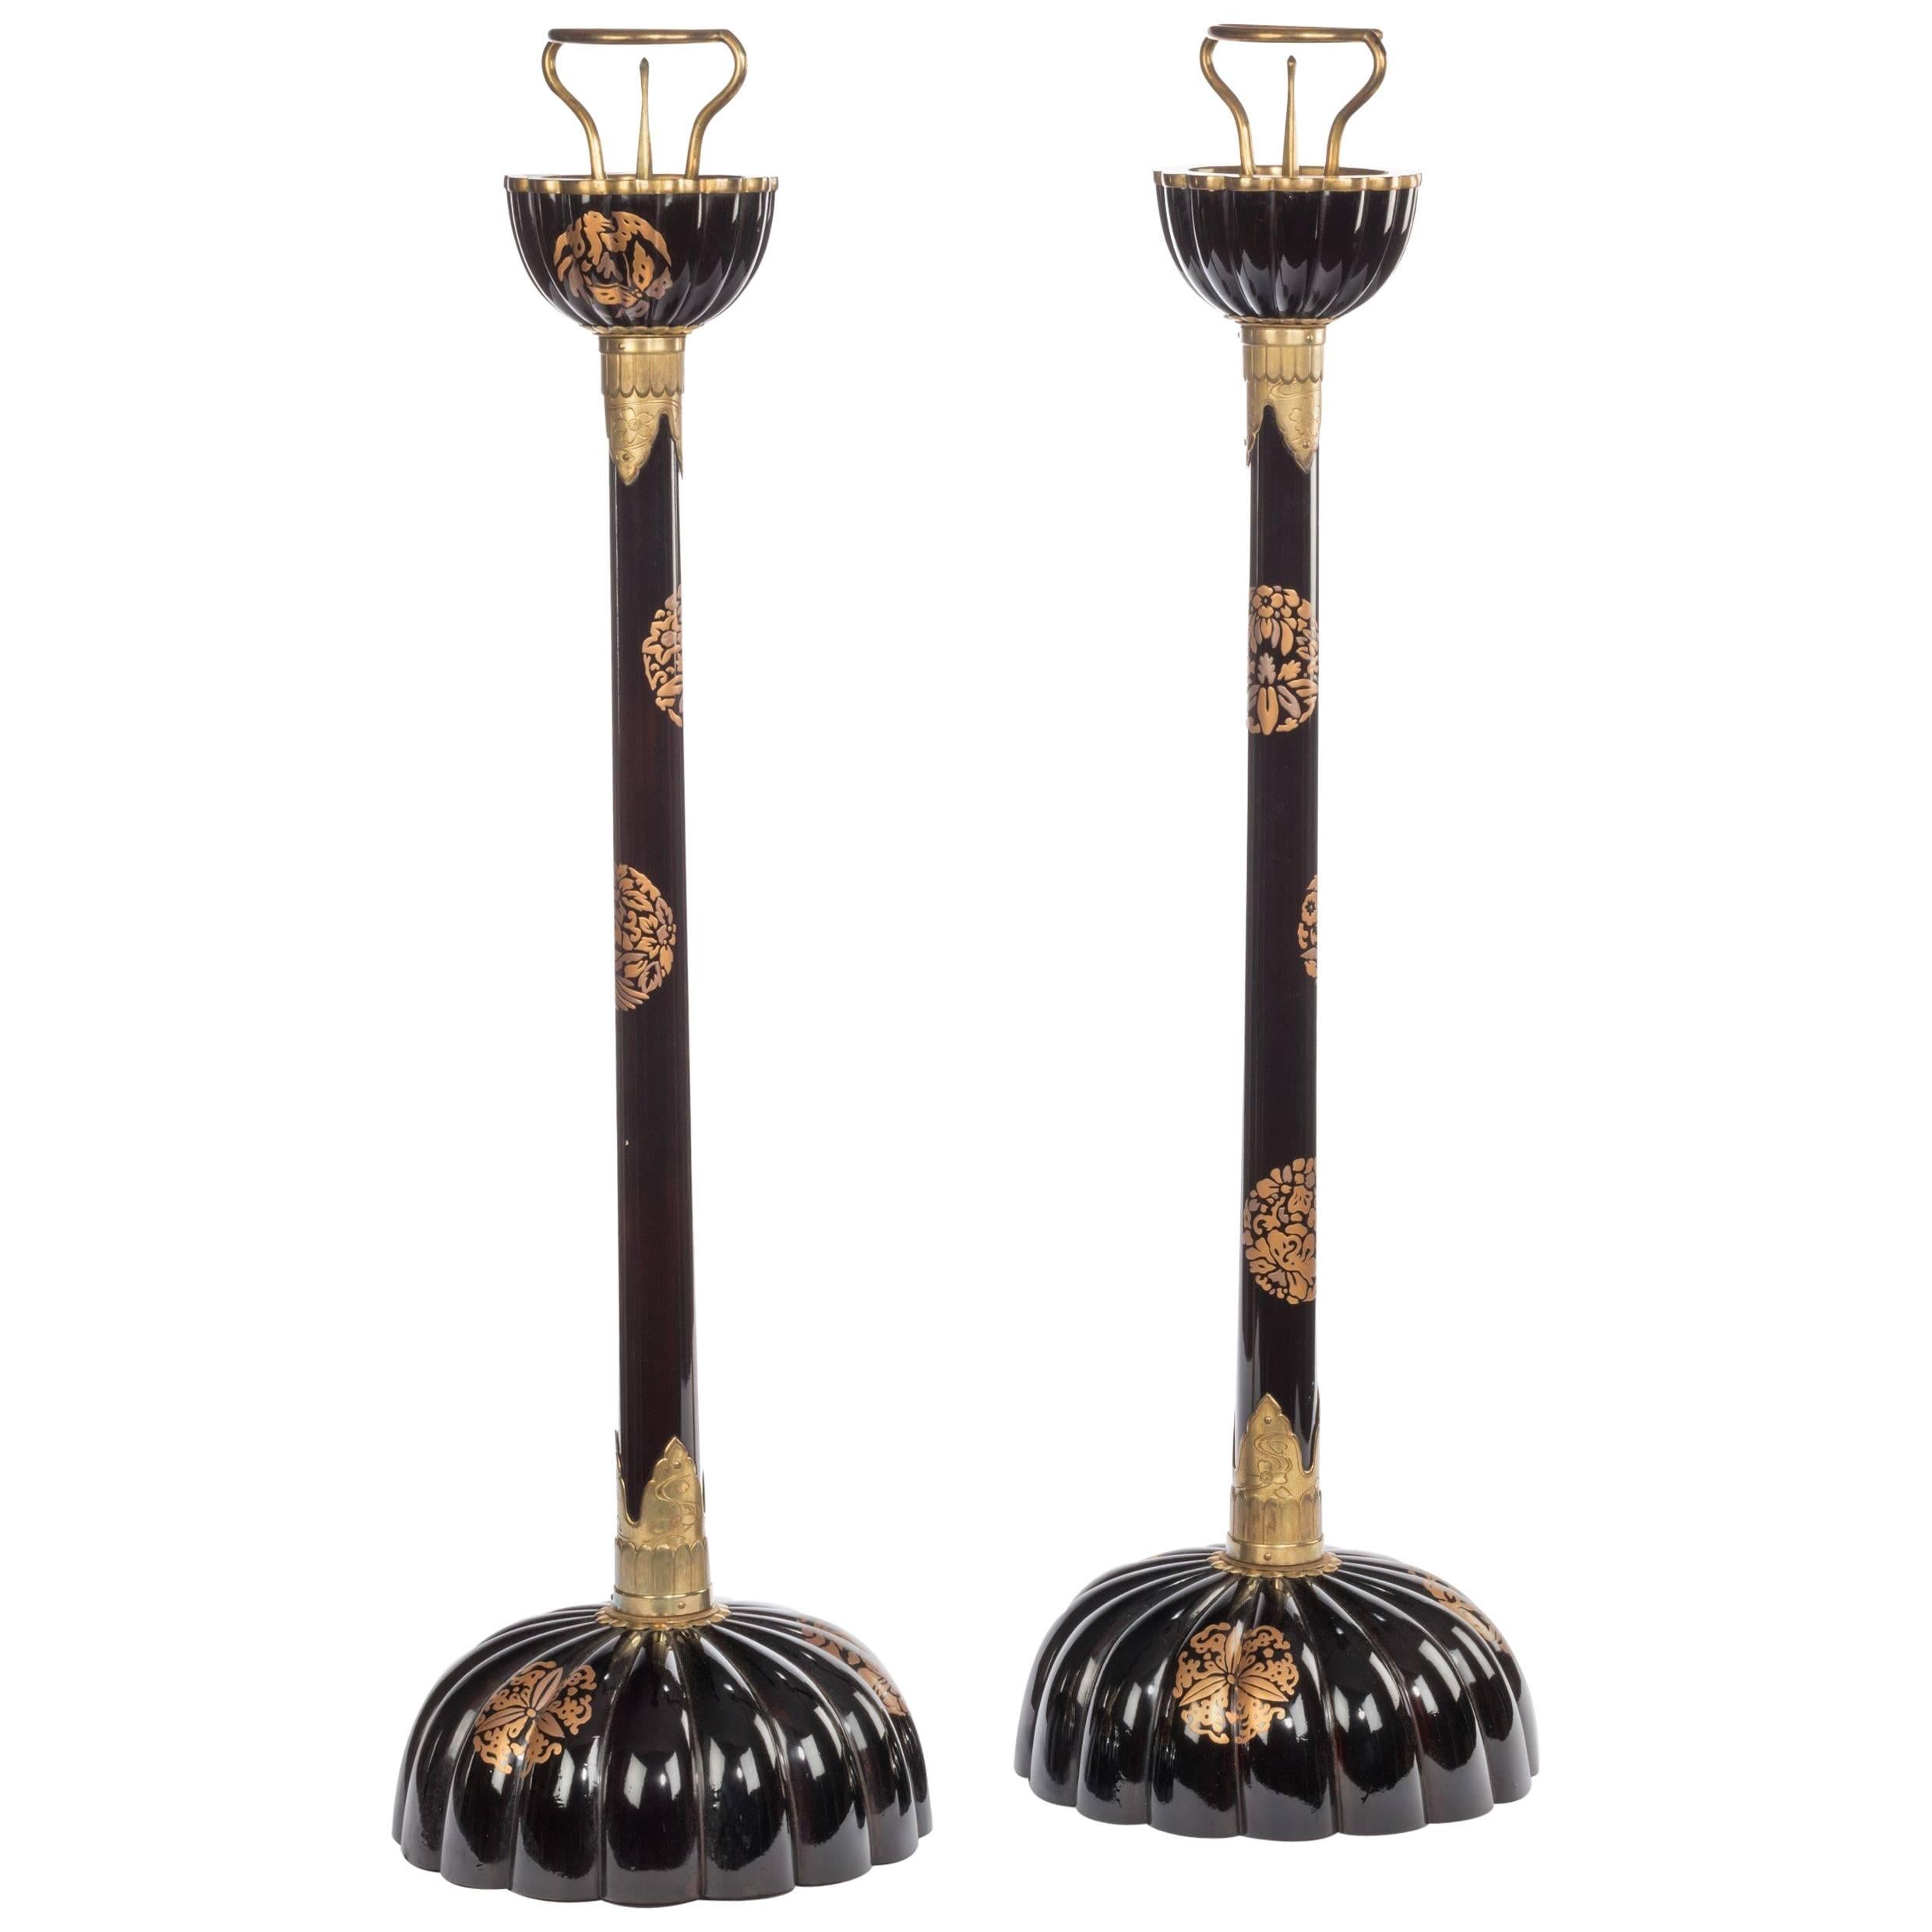 Rare Pair of Meiji Period Lacquer Temple Candlesticks